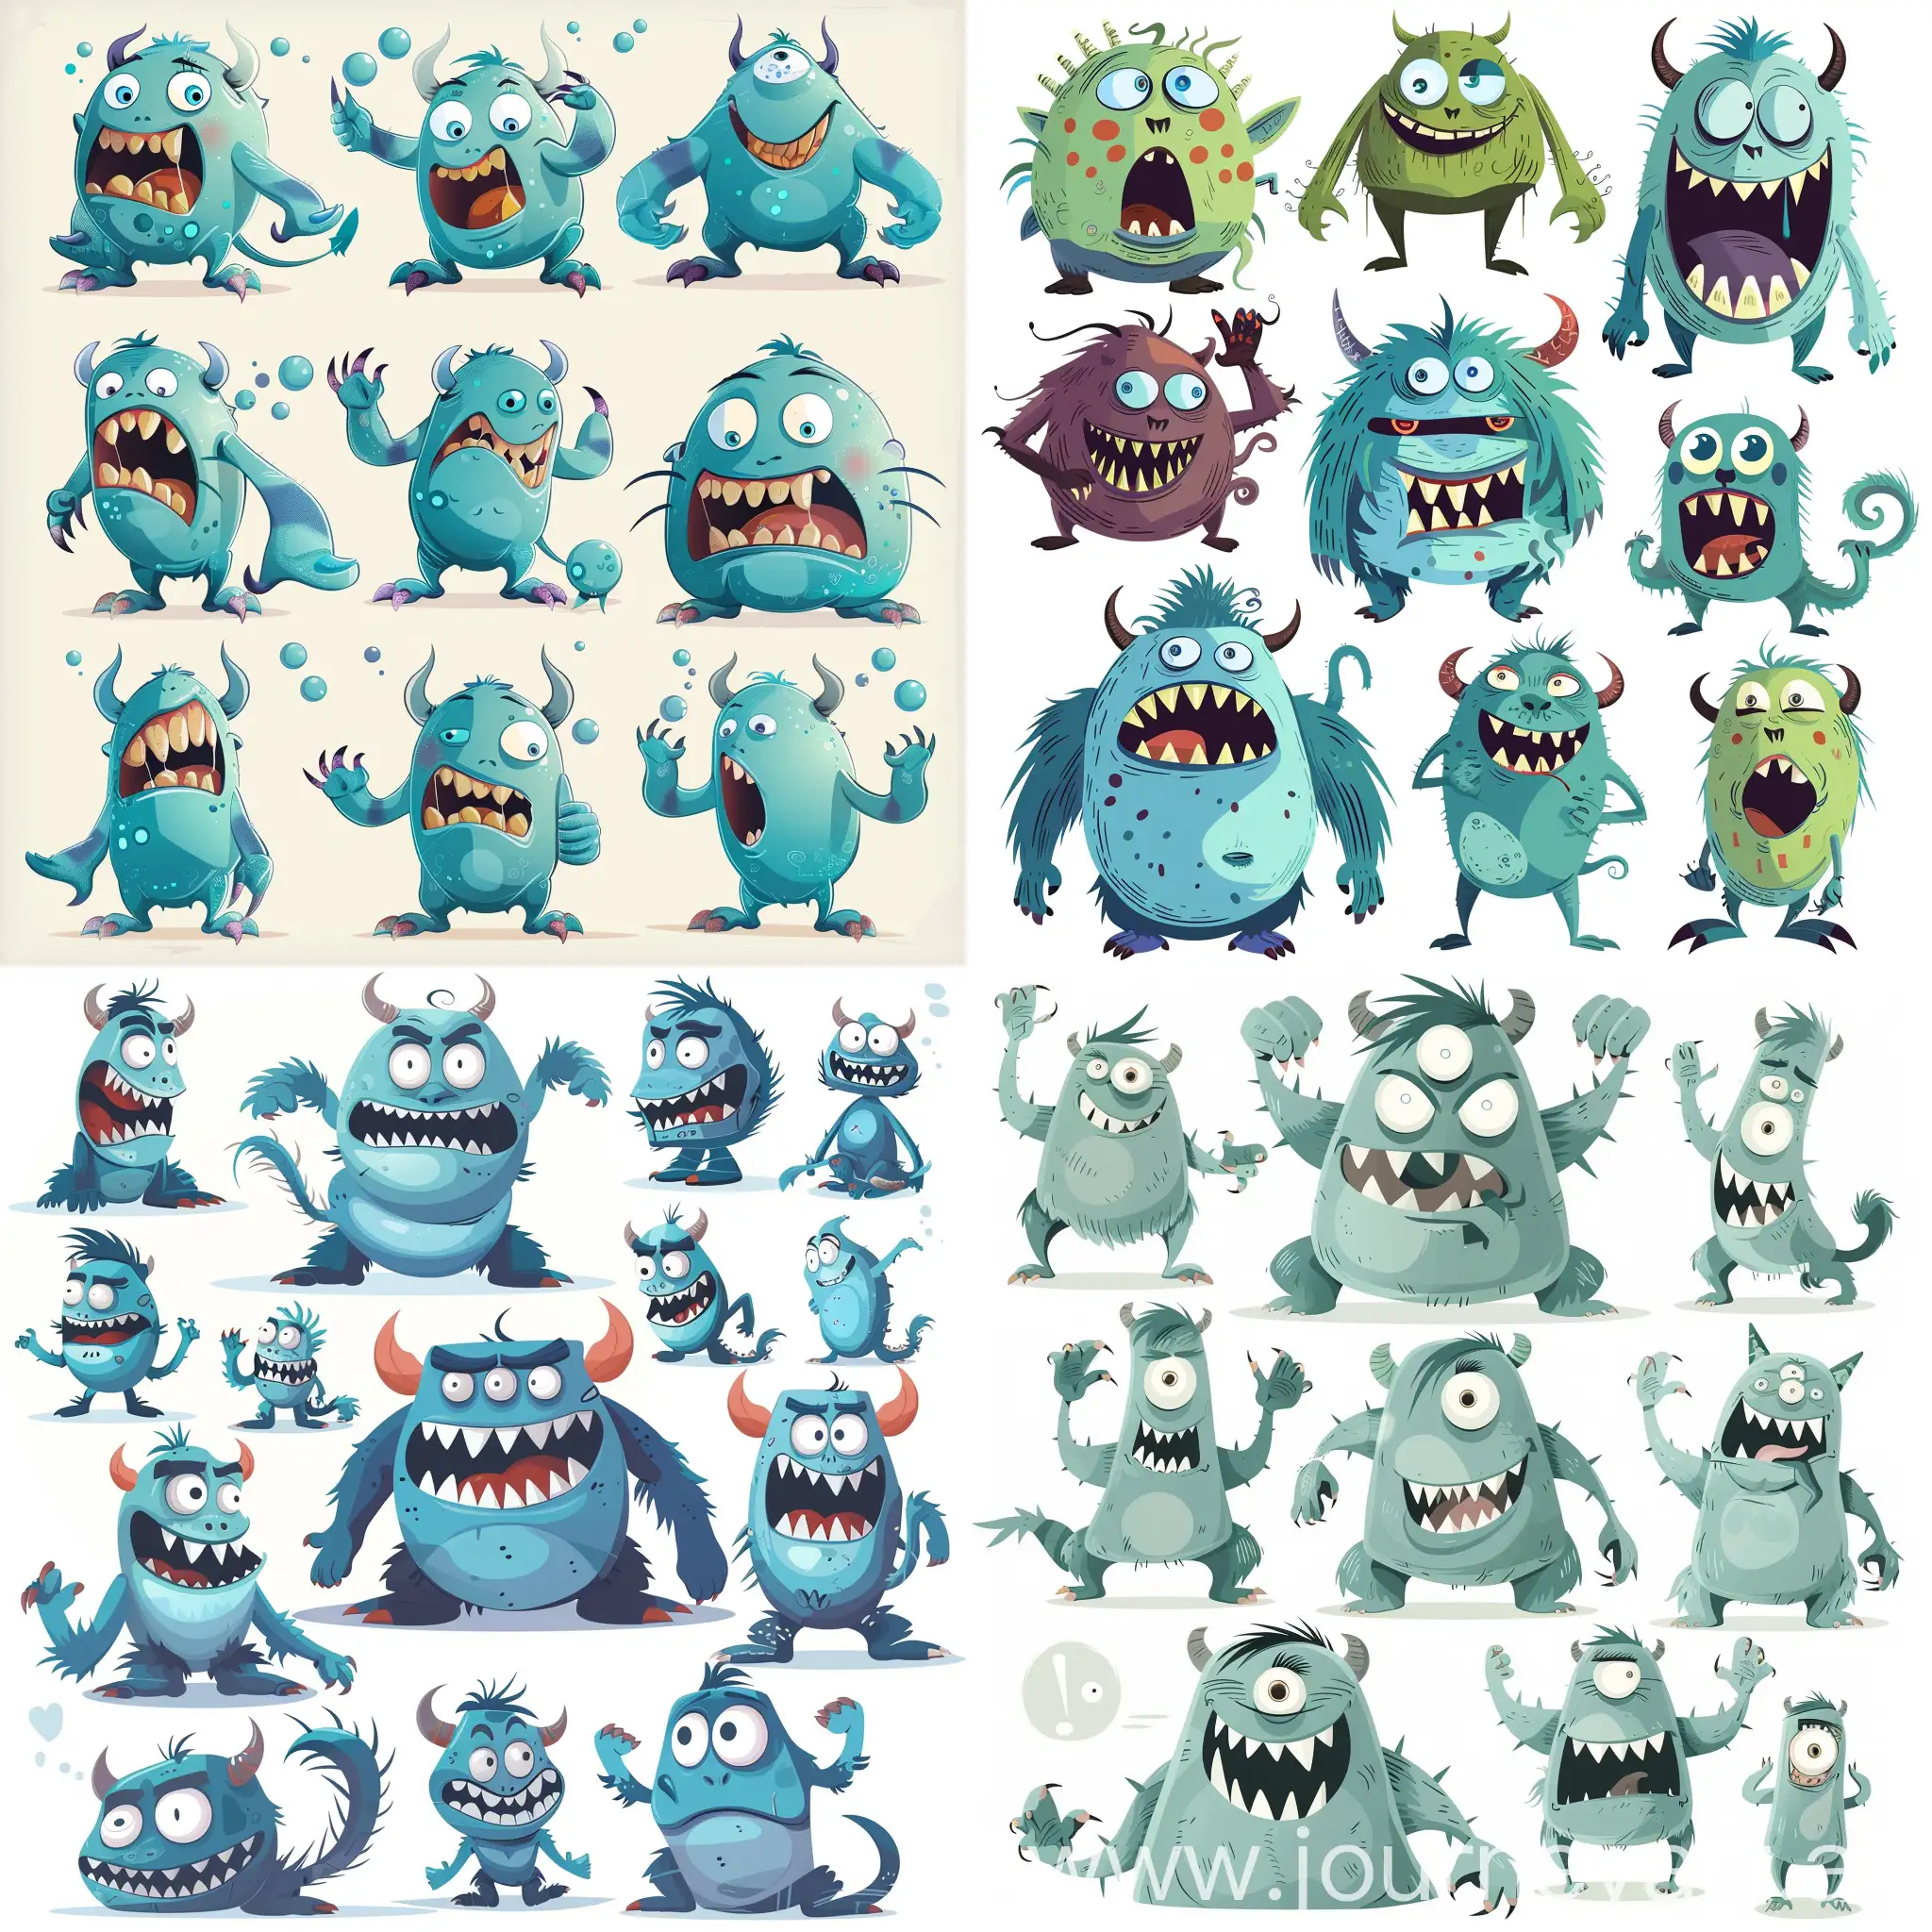 Playful-Cartoon-Monsters-with-Various-Expressions-in-HighQuality-Vector-Style